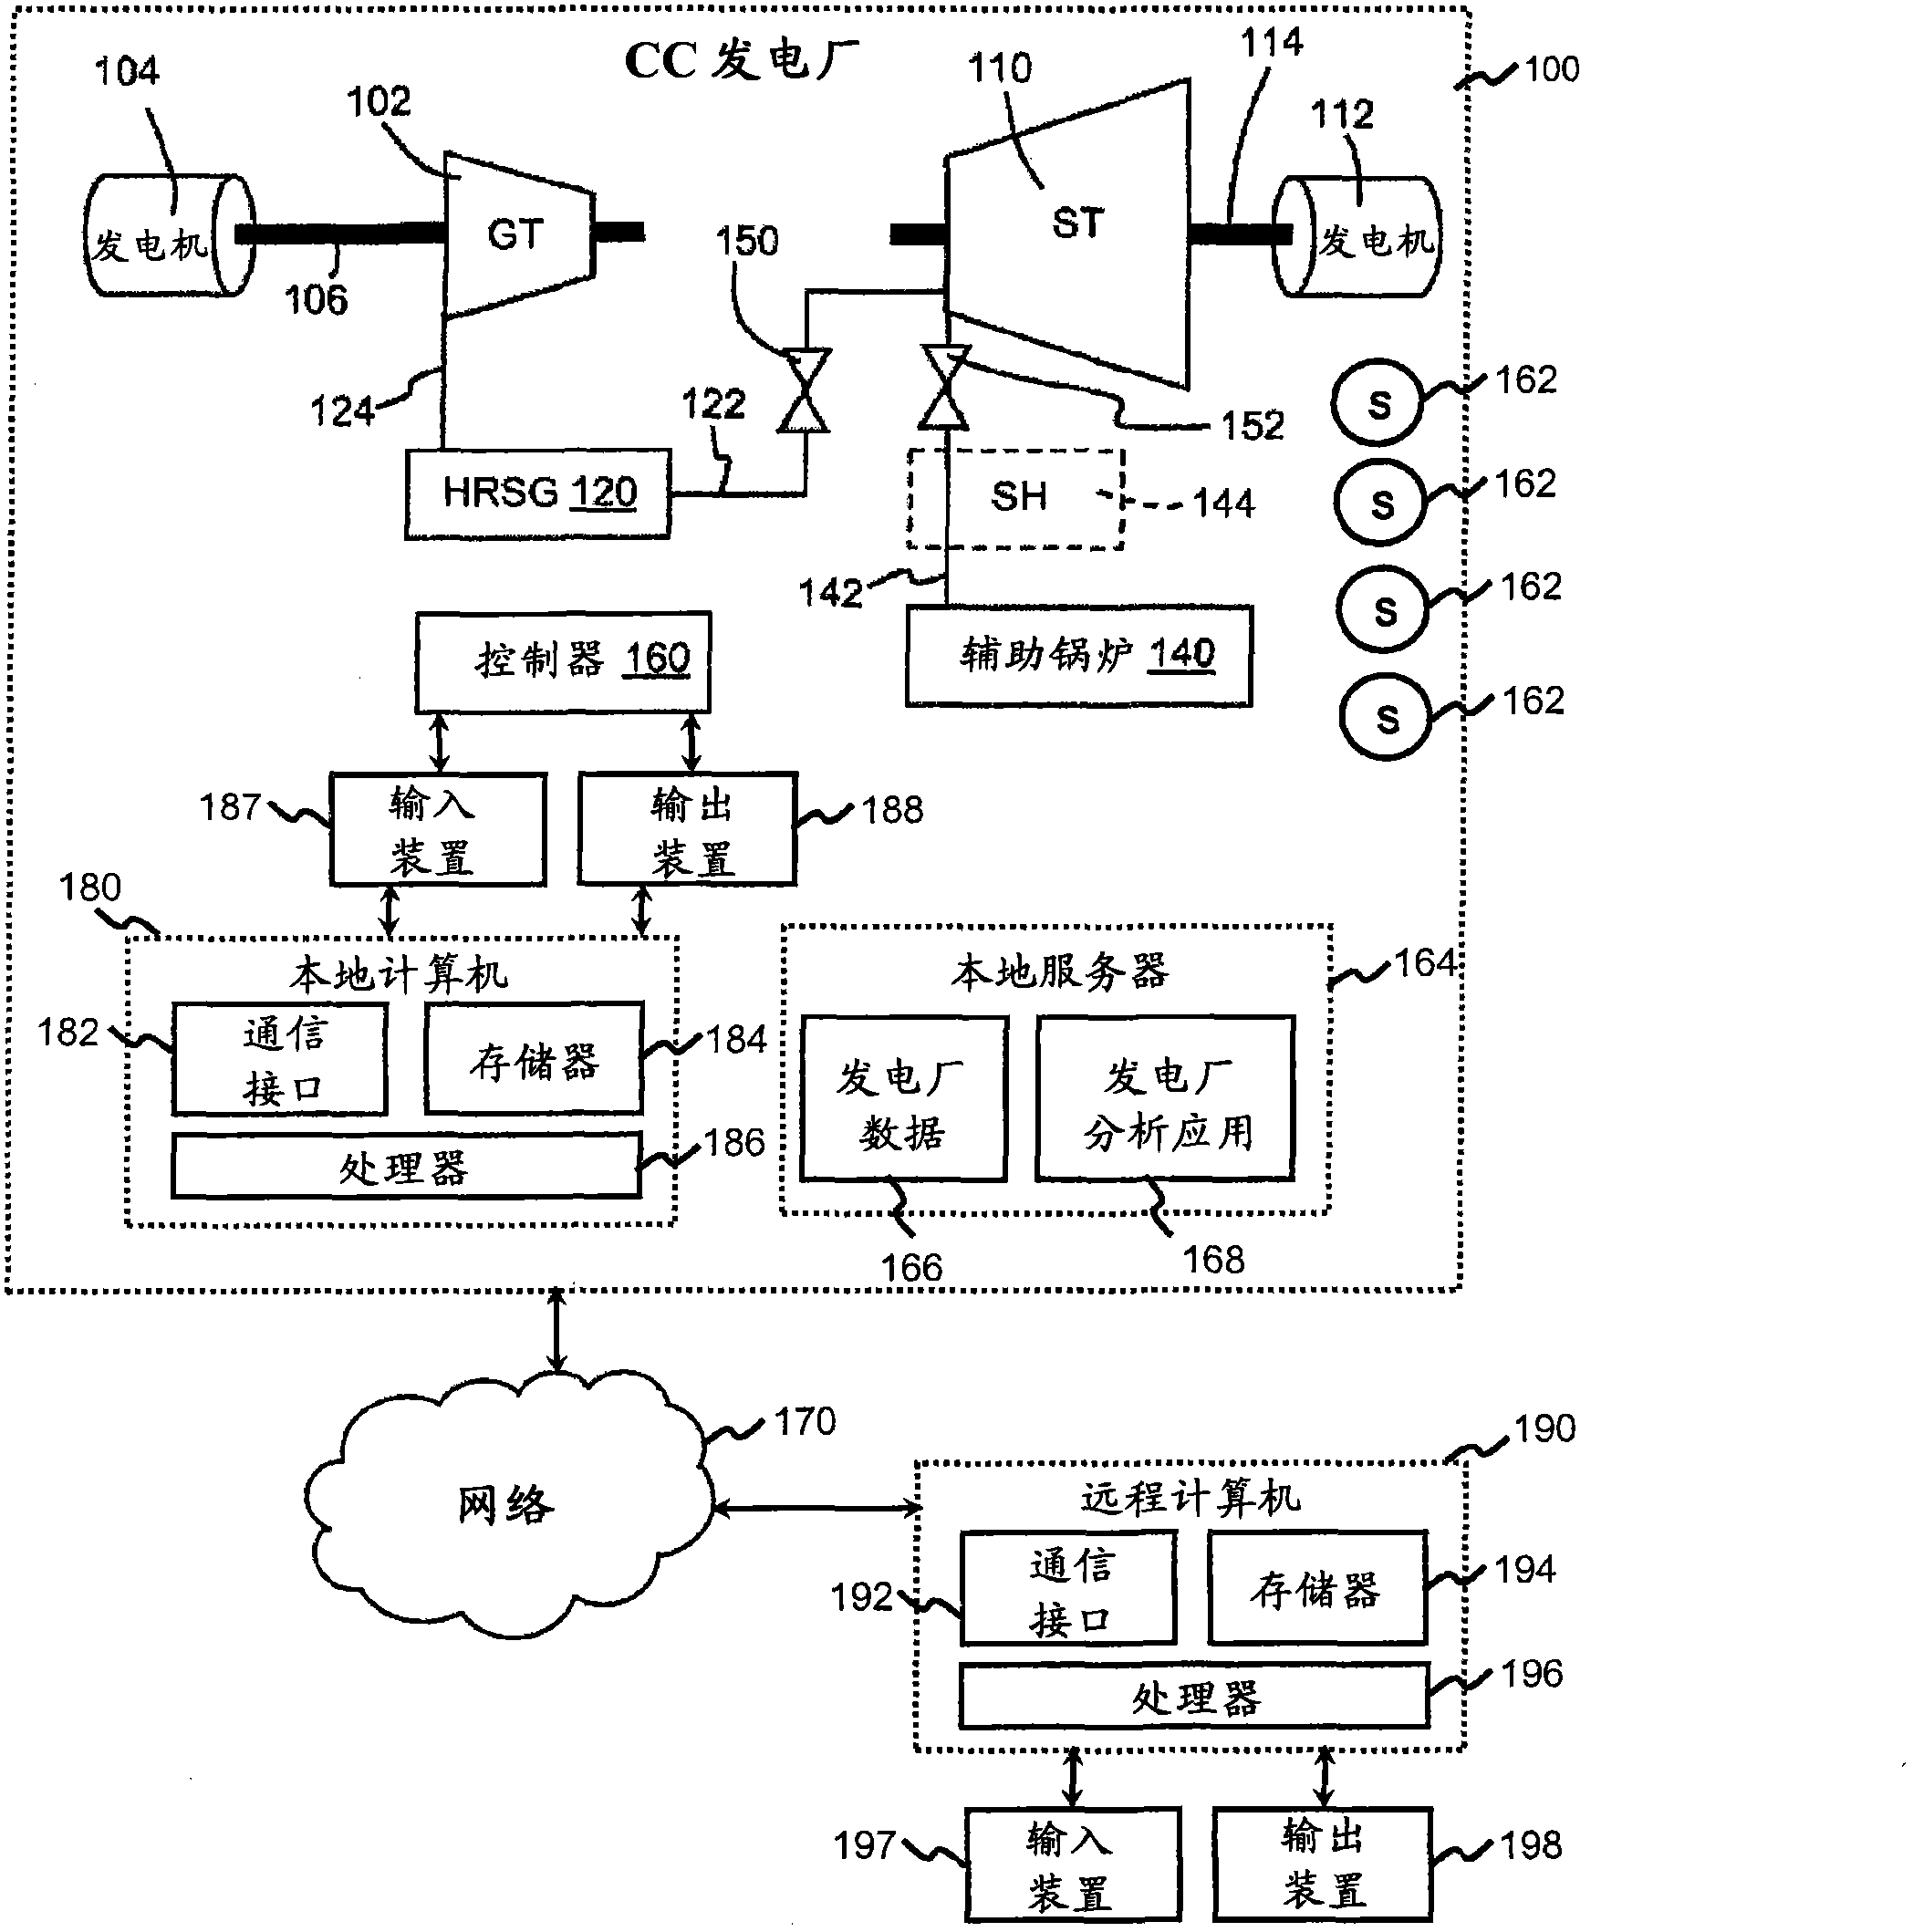 Automated system and method for implementing statistical comparison of power plant operations